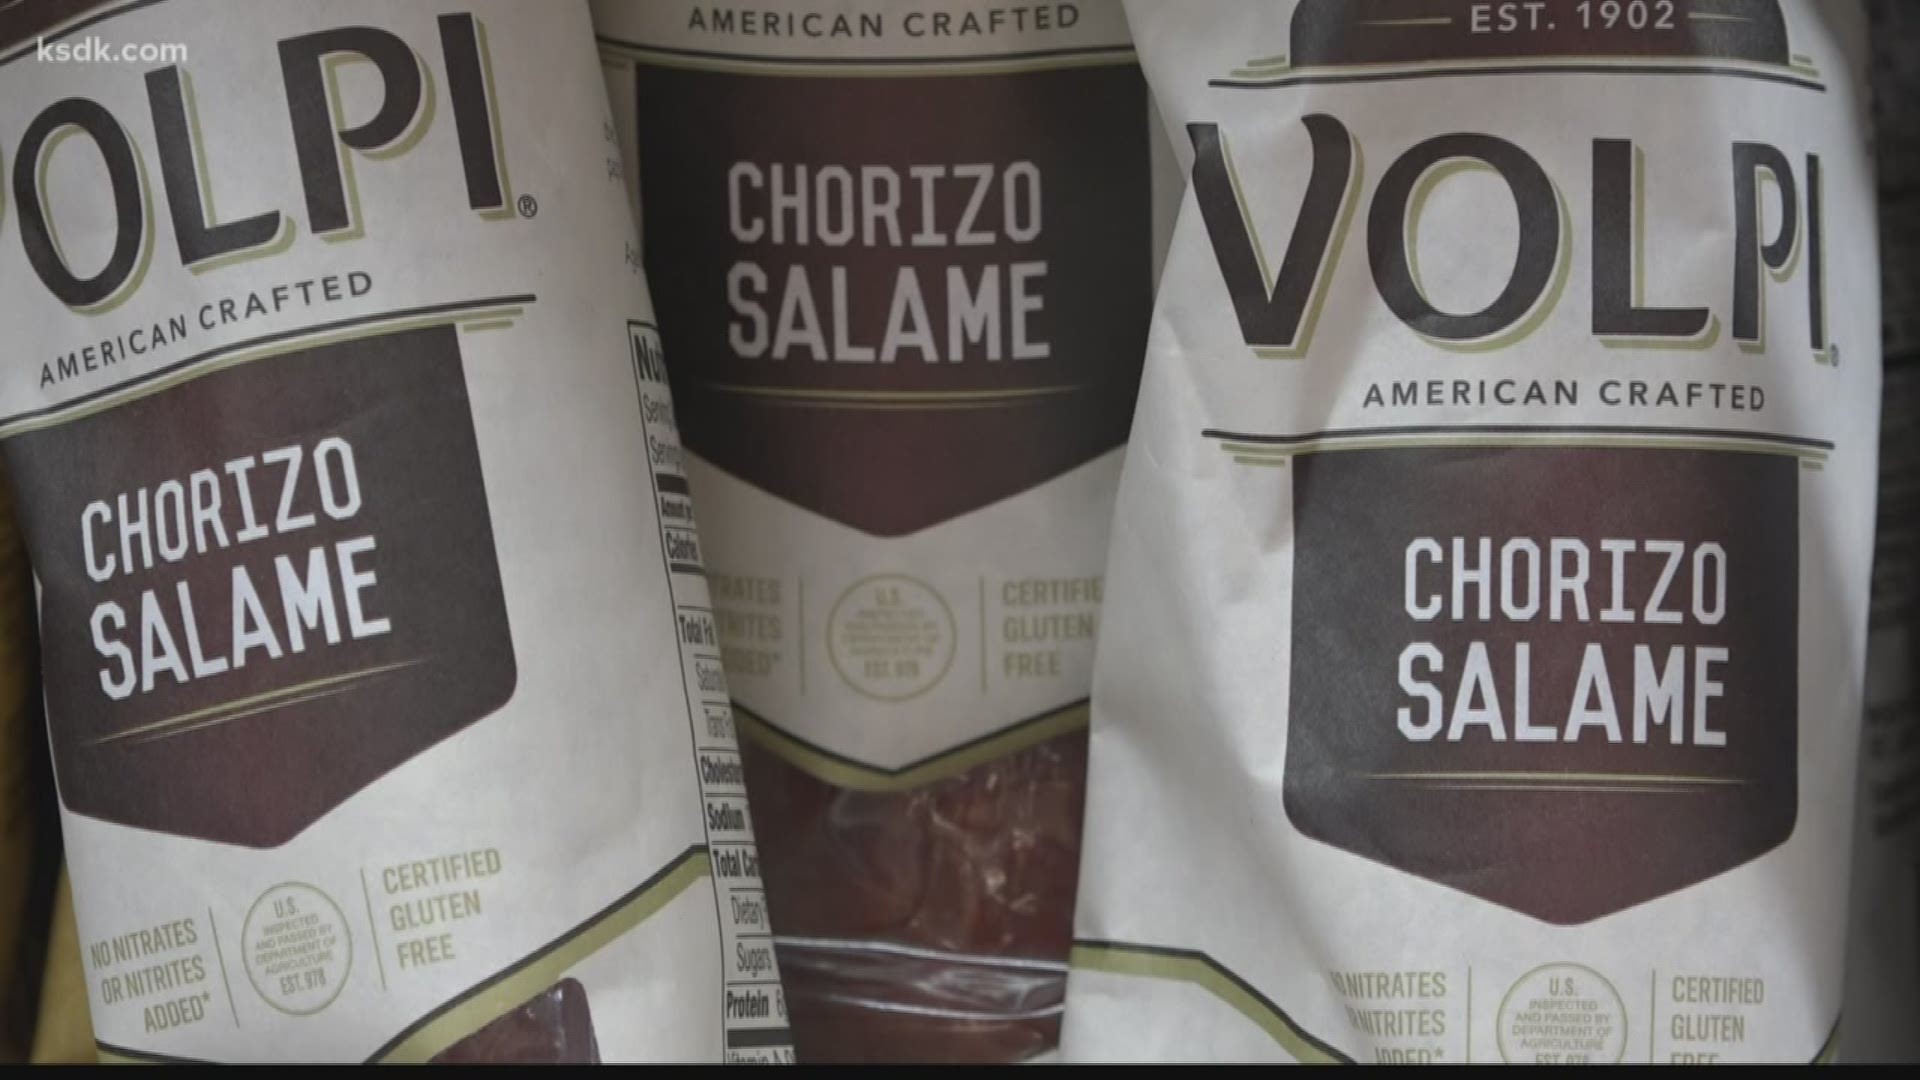 Volpi Foods in a unique position to hire. They supply restaurants, which are hurting right now, but they also sell products in thousands of grocery stores